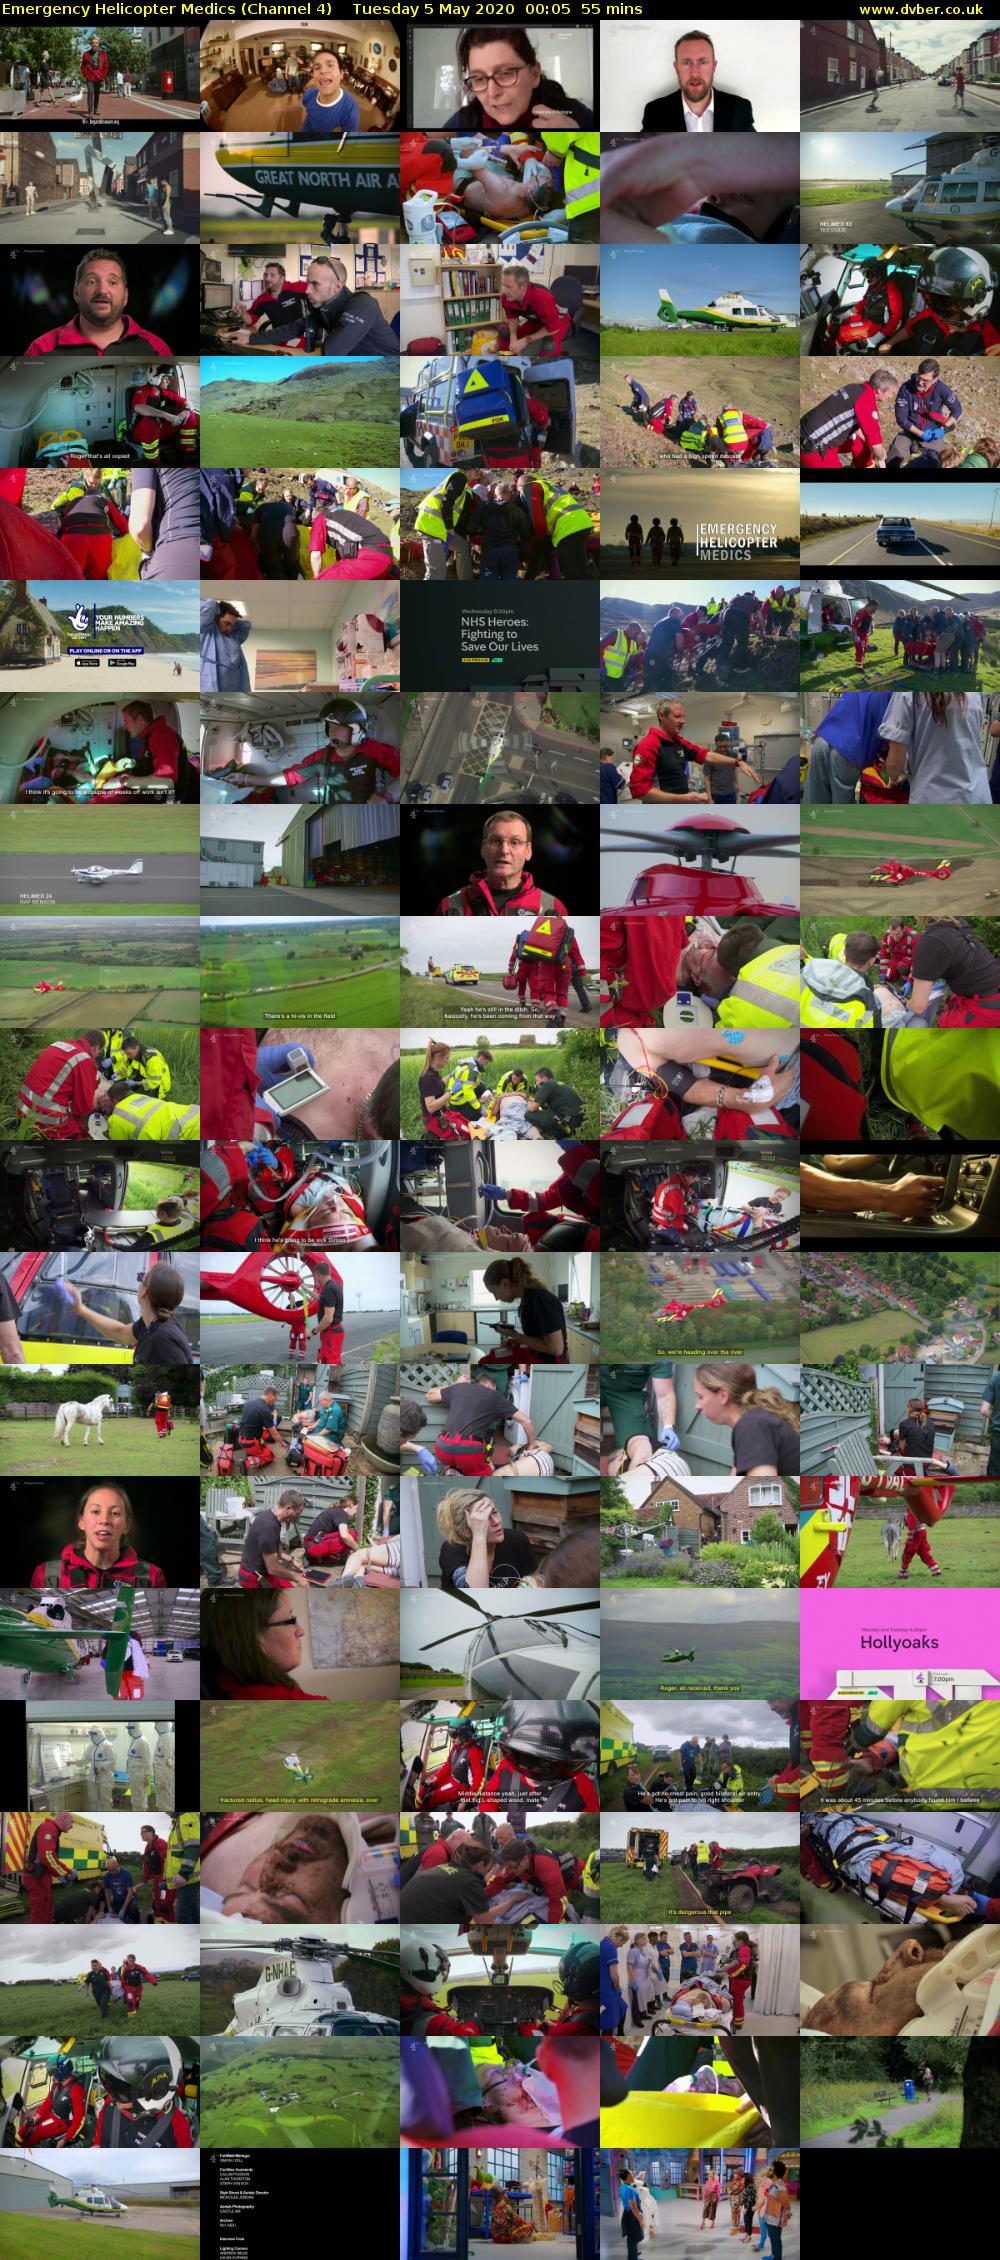 Emergency Helicopter Medics (Channel 4) Tuesday 5 May 2020 00:05 - 01:00